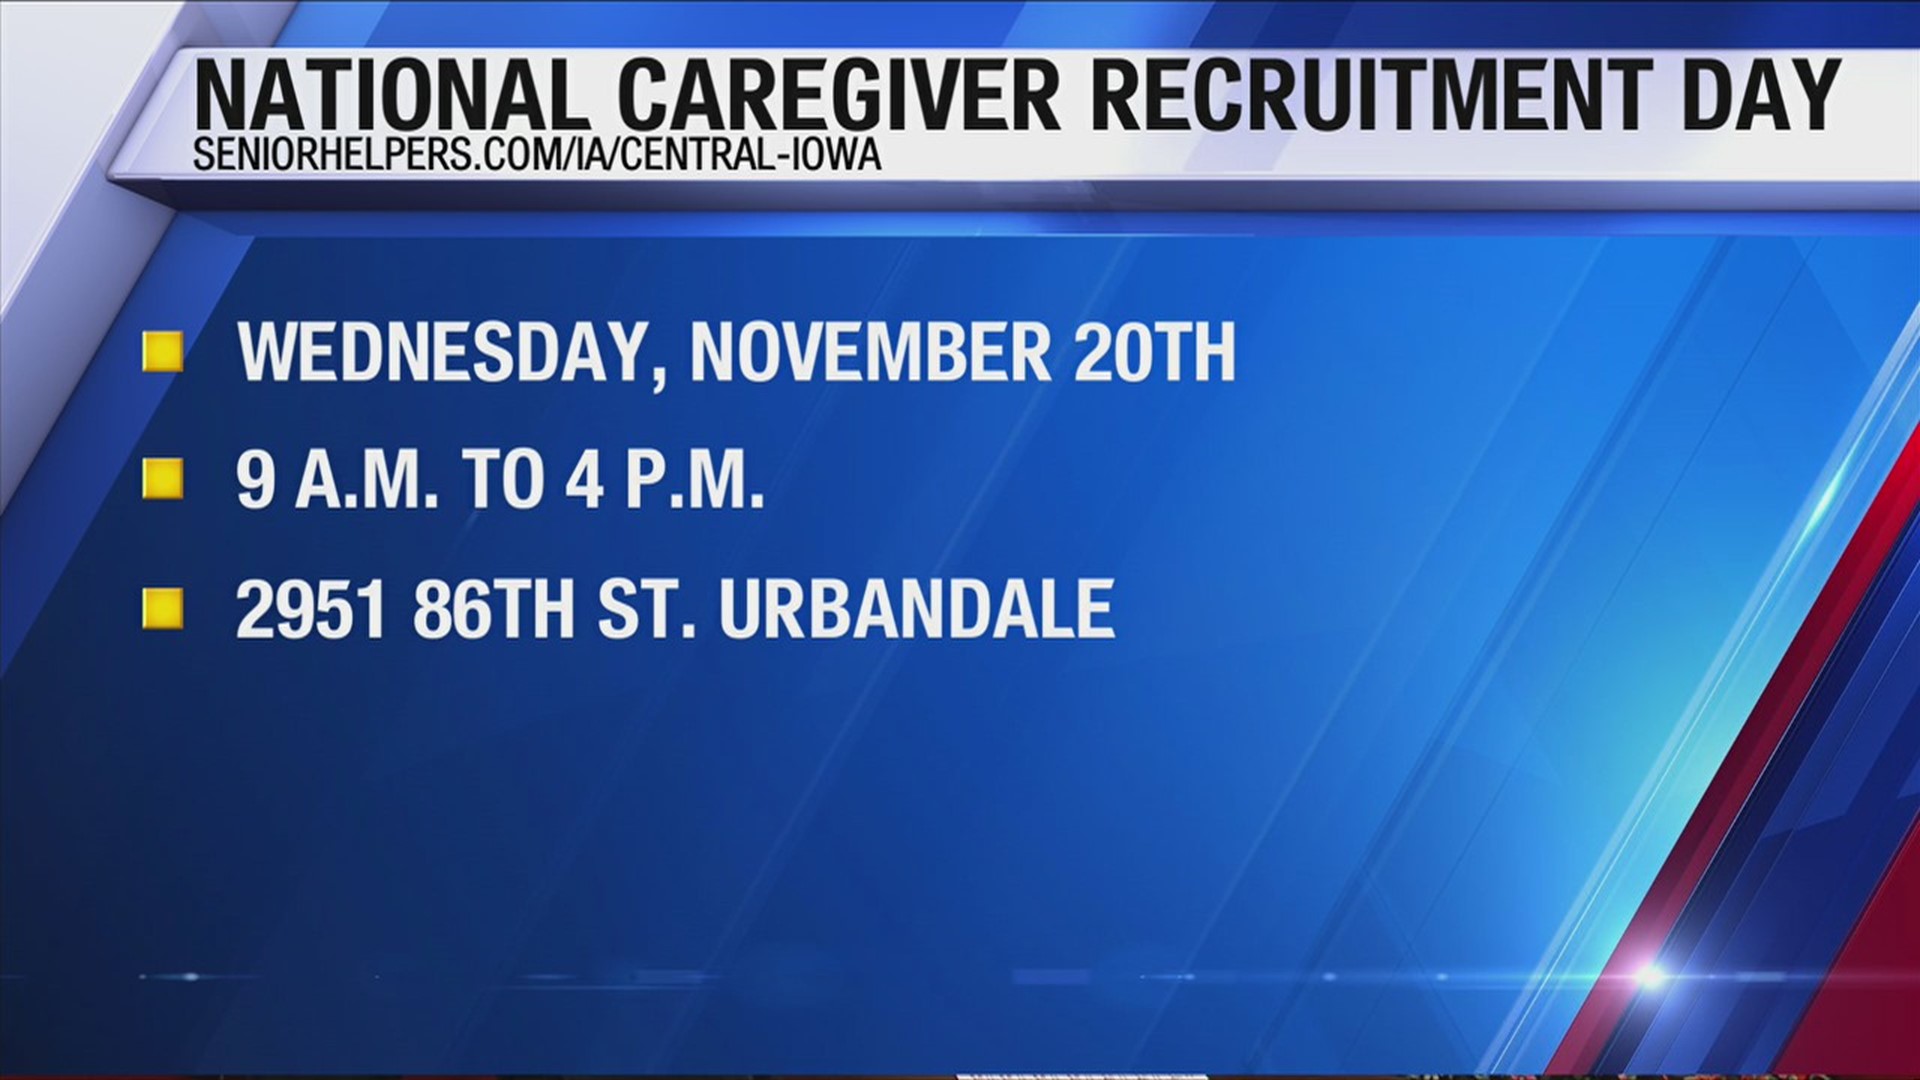 Wednesday is National Caregiver Recruitment Day, and Senior Helpers Caregivers is looking for individuals in the community to help local seniors.